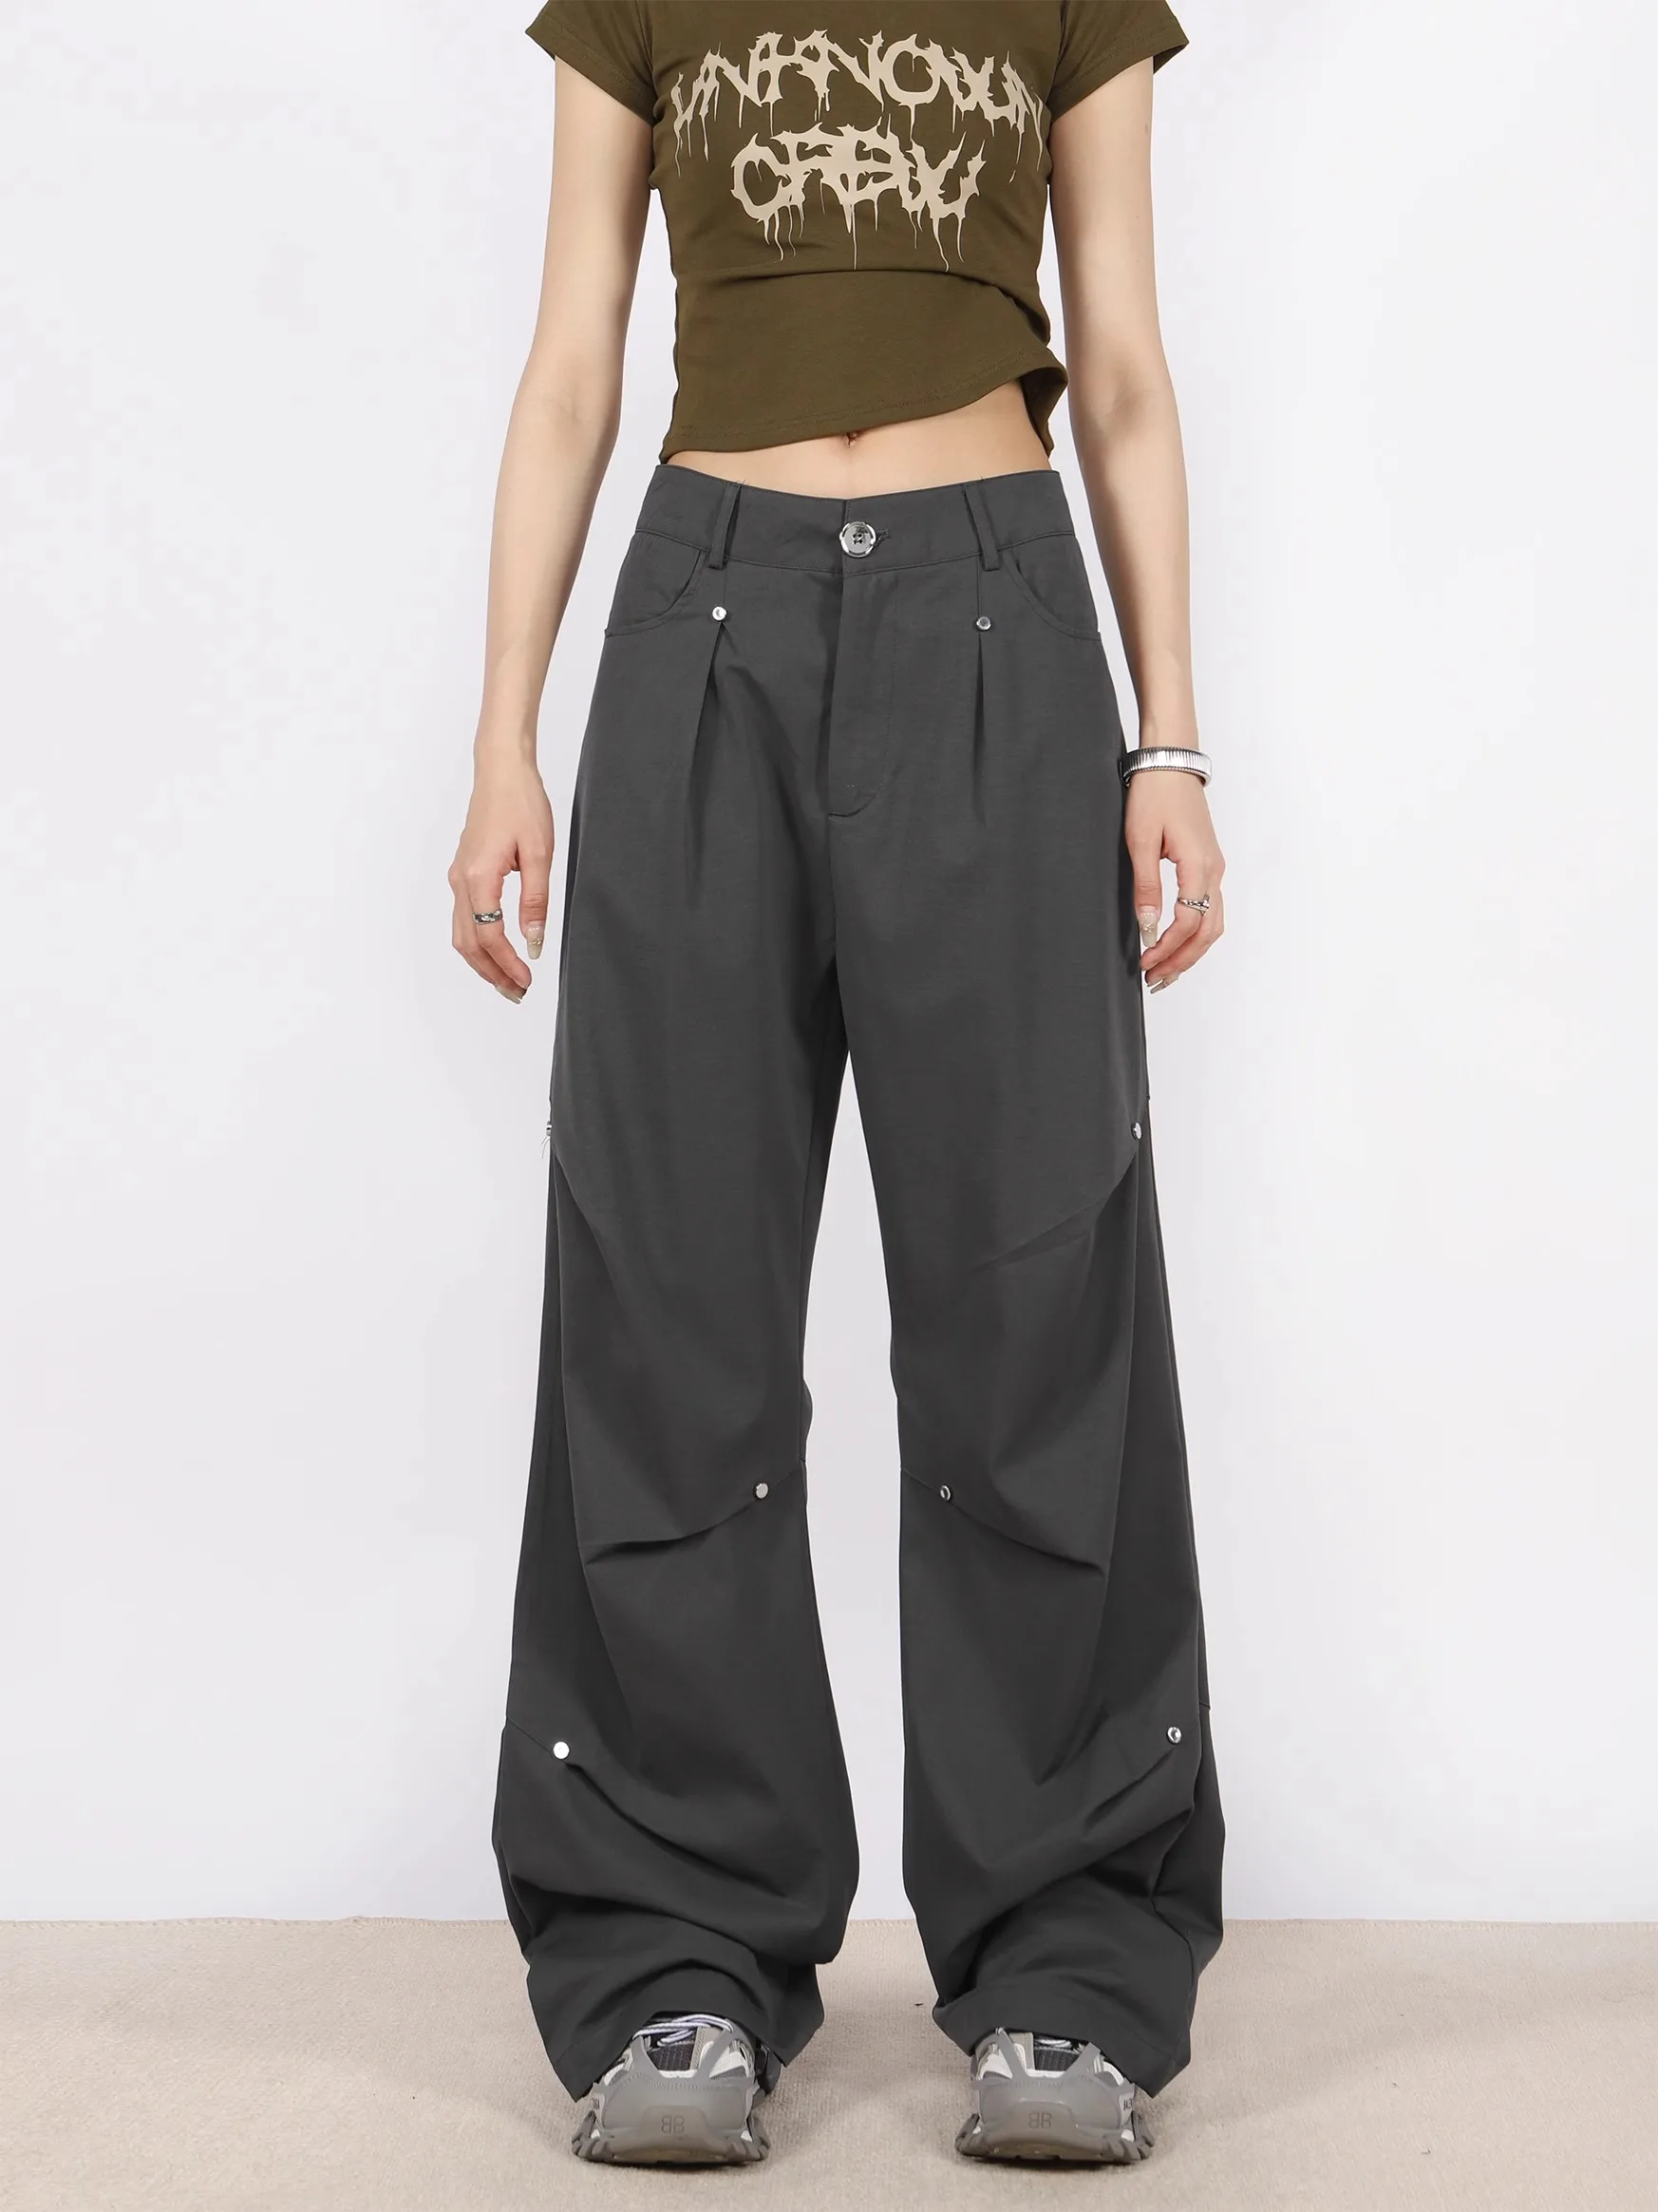 

Women's High Street Casual Overalls Solid Color Loose Wide Leg Pants American Retro 90's Oversized Y2k Black Cargo Tierred Pants